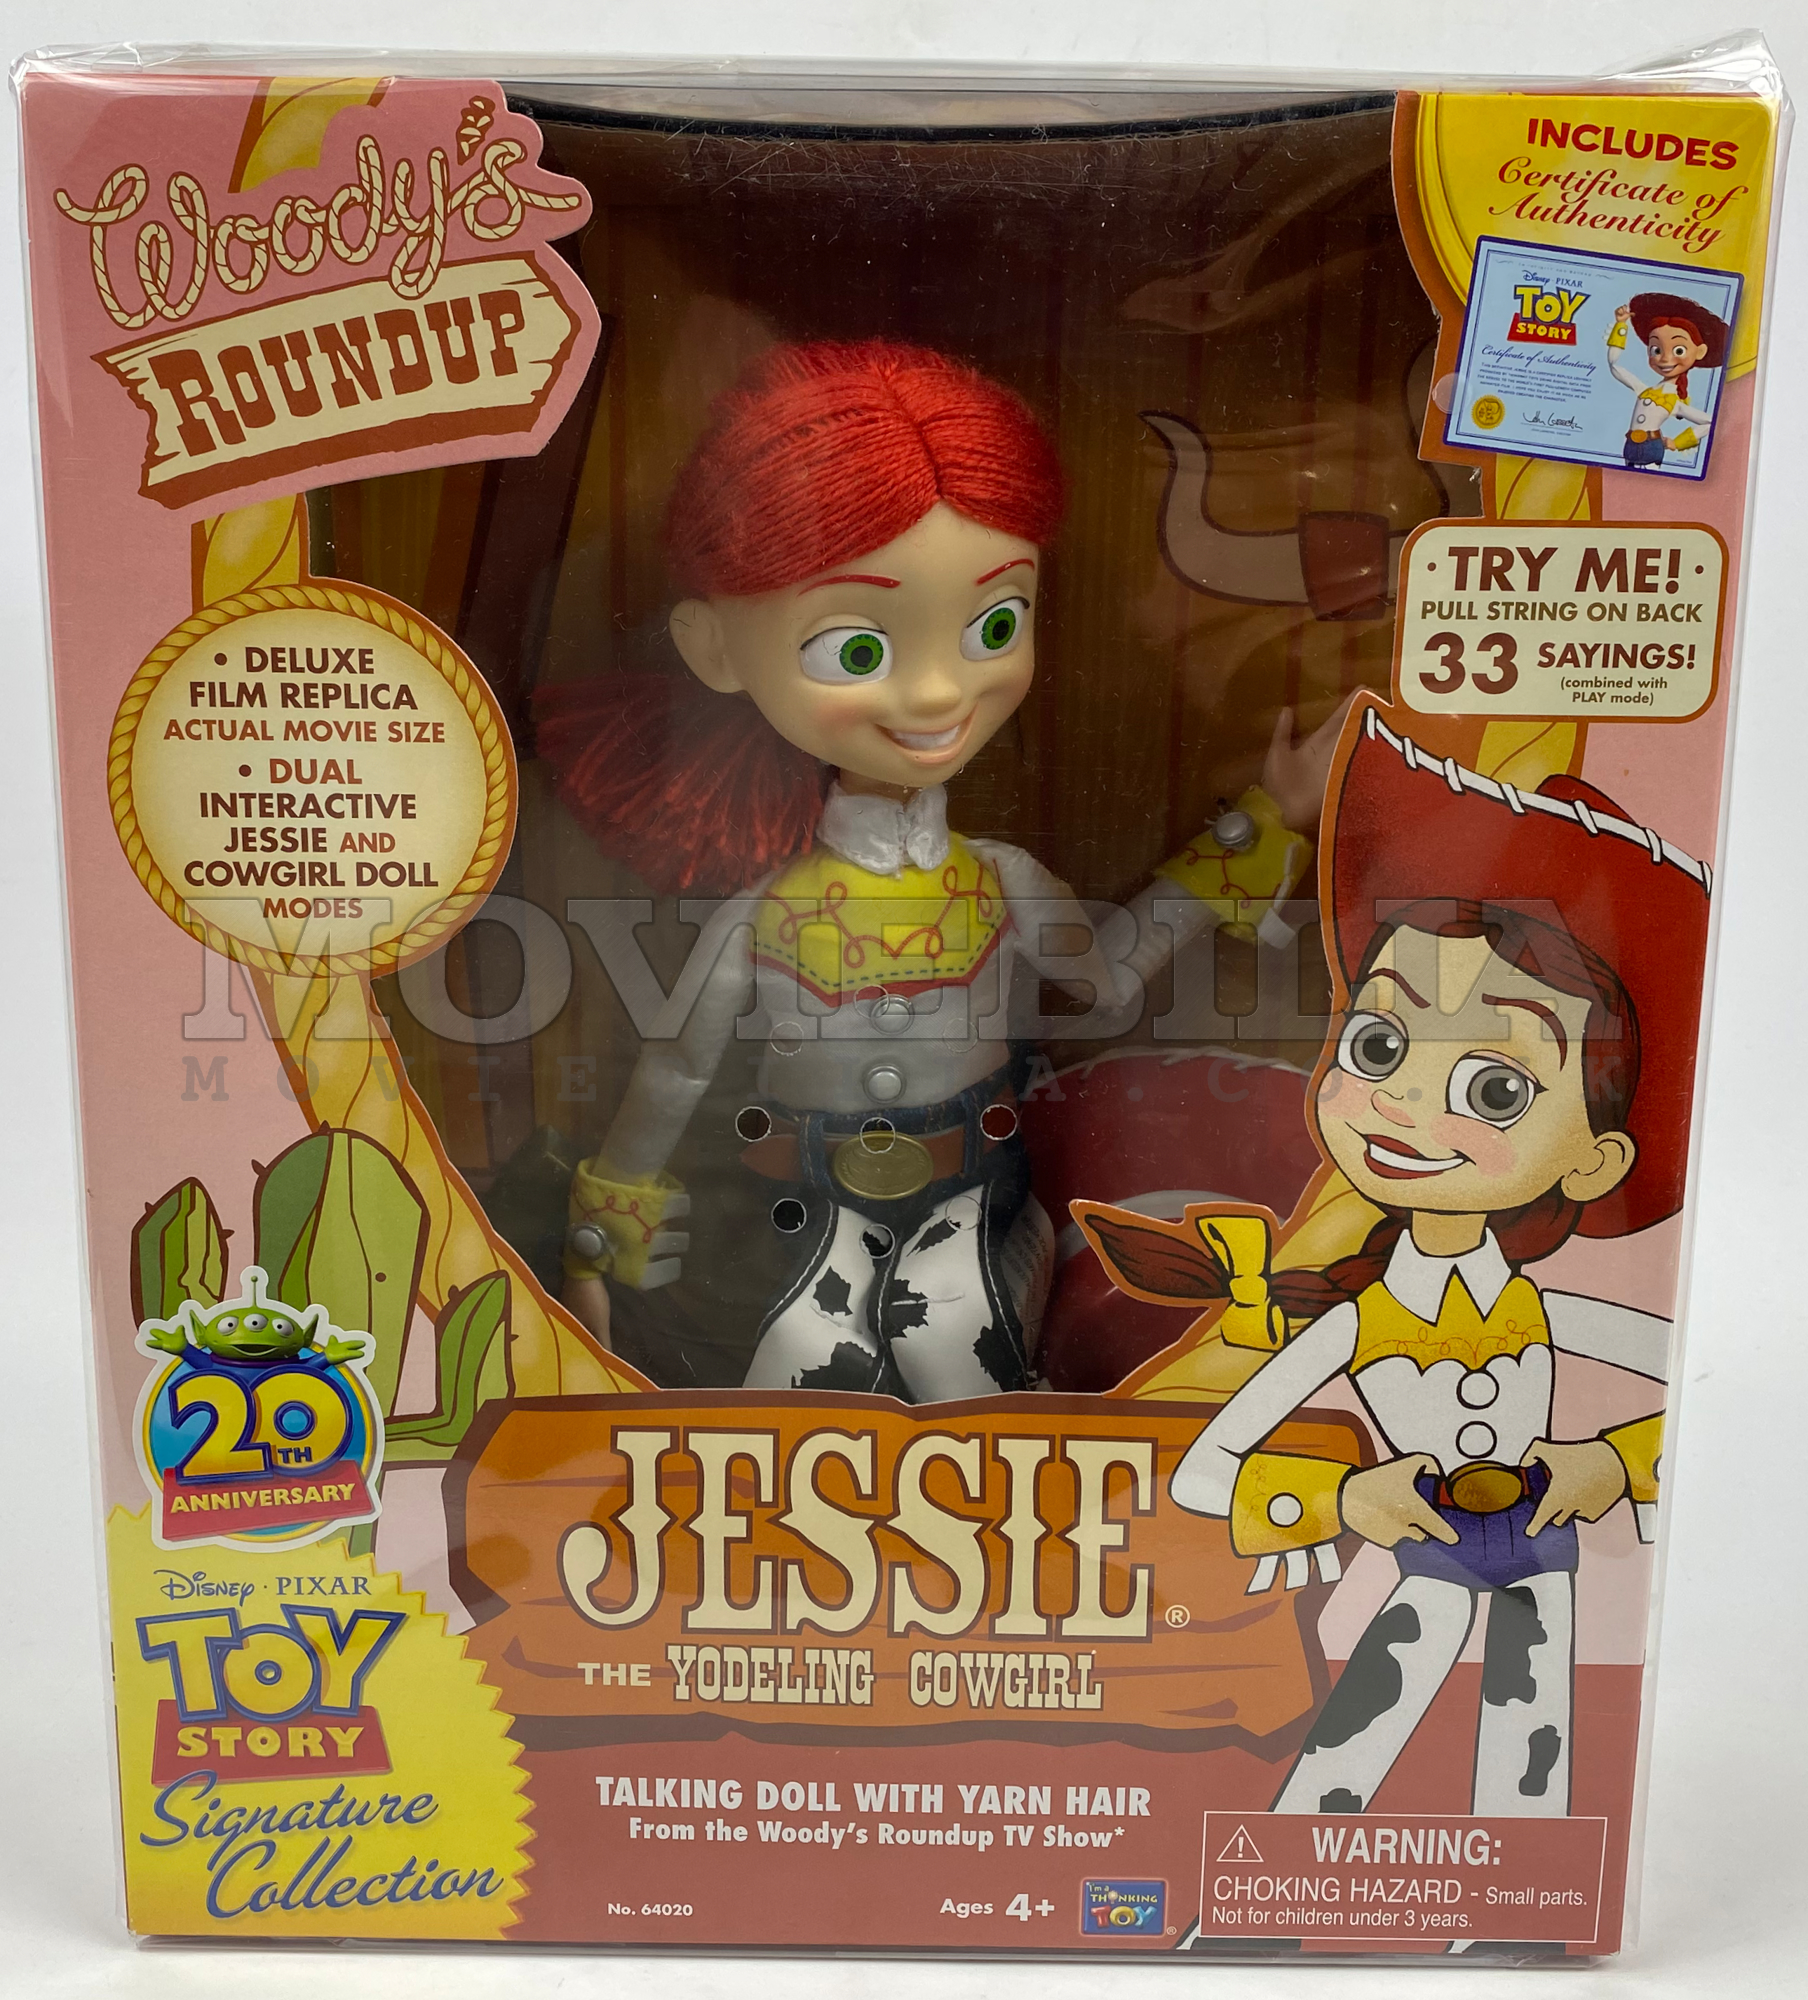 TOY STORY Signature Collection Jessie